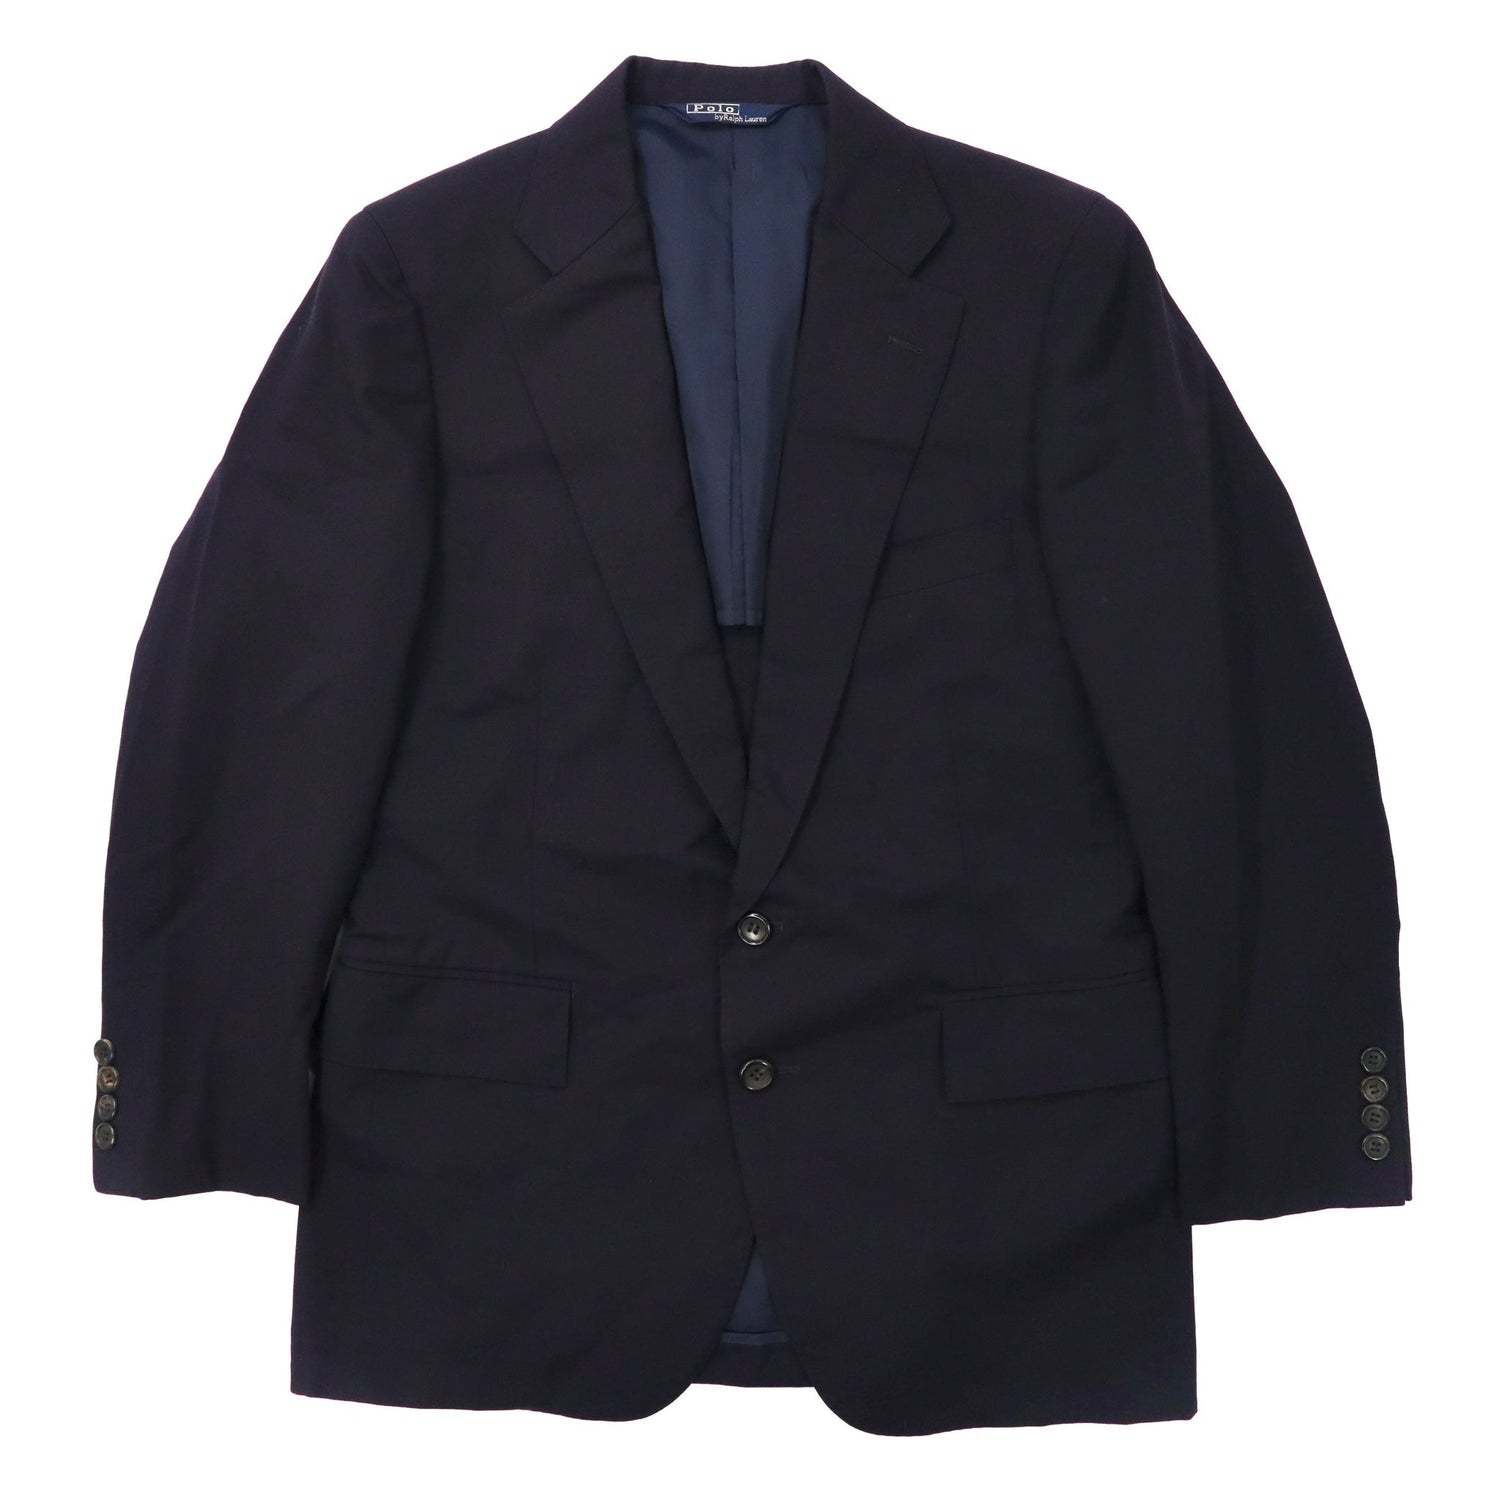 POLO BY RALPH LAUREN 2B Tailored Jacket Navy Blue 92A4 Navy Wool